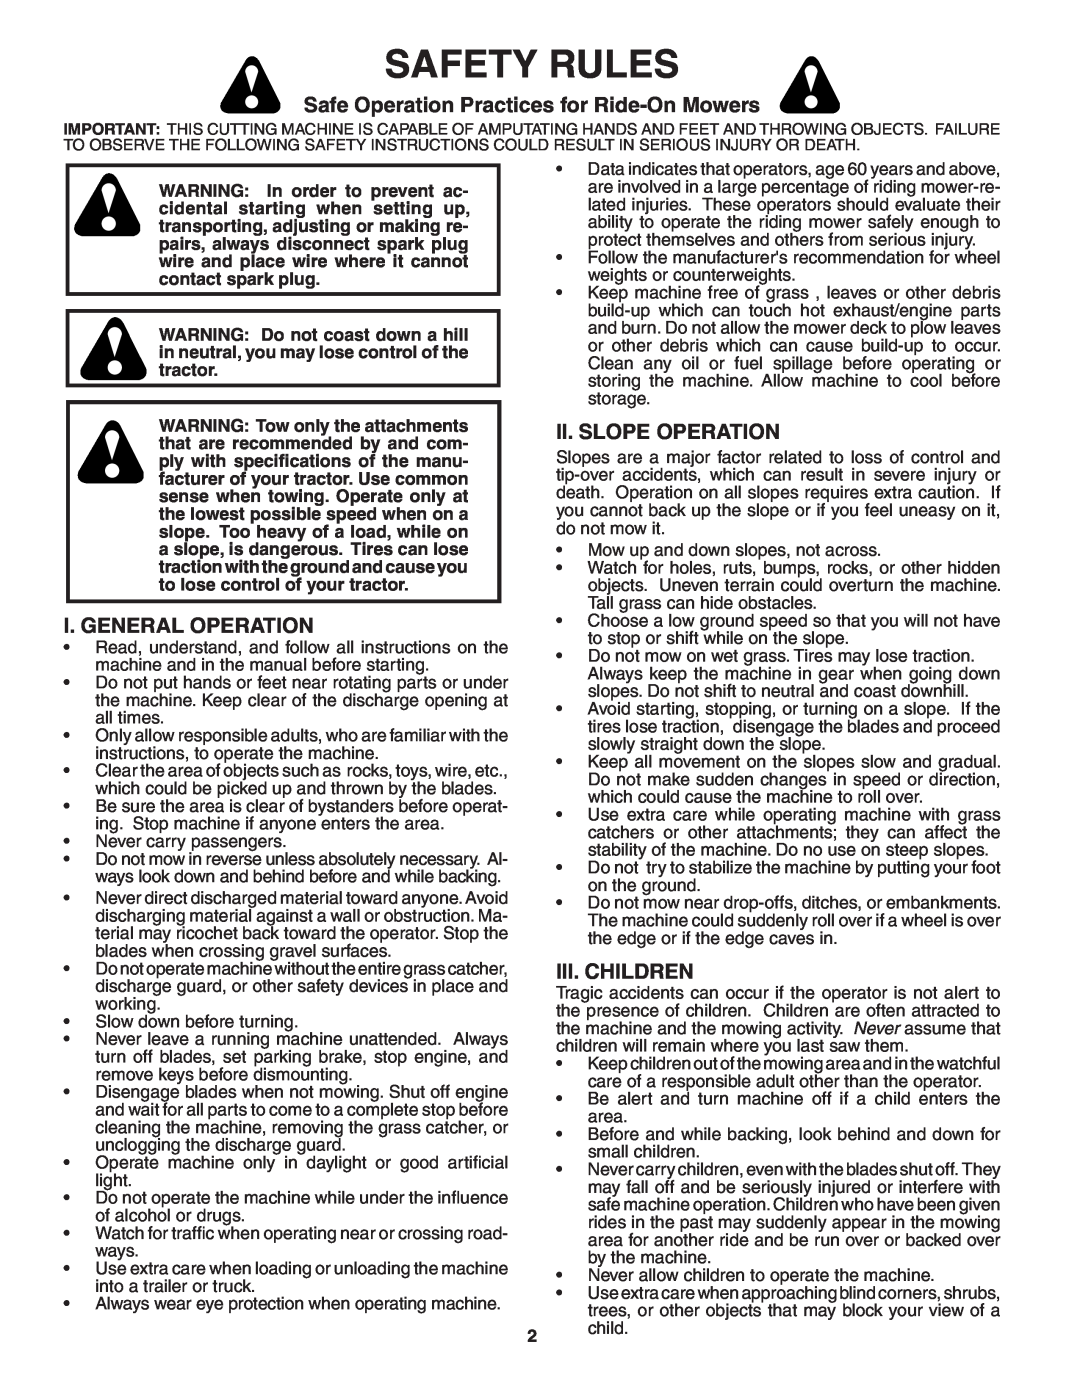 Poulan 960 72 00-06 Safety Rules, Safe Operation Practices for Ride-OnMowers, I. General Operation, Ii. Slope Operation 